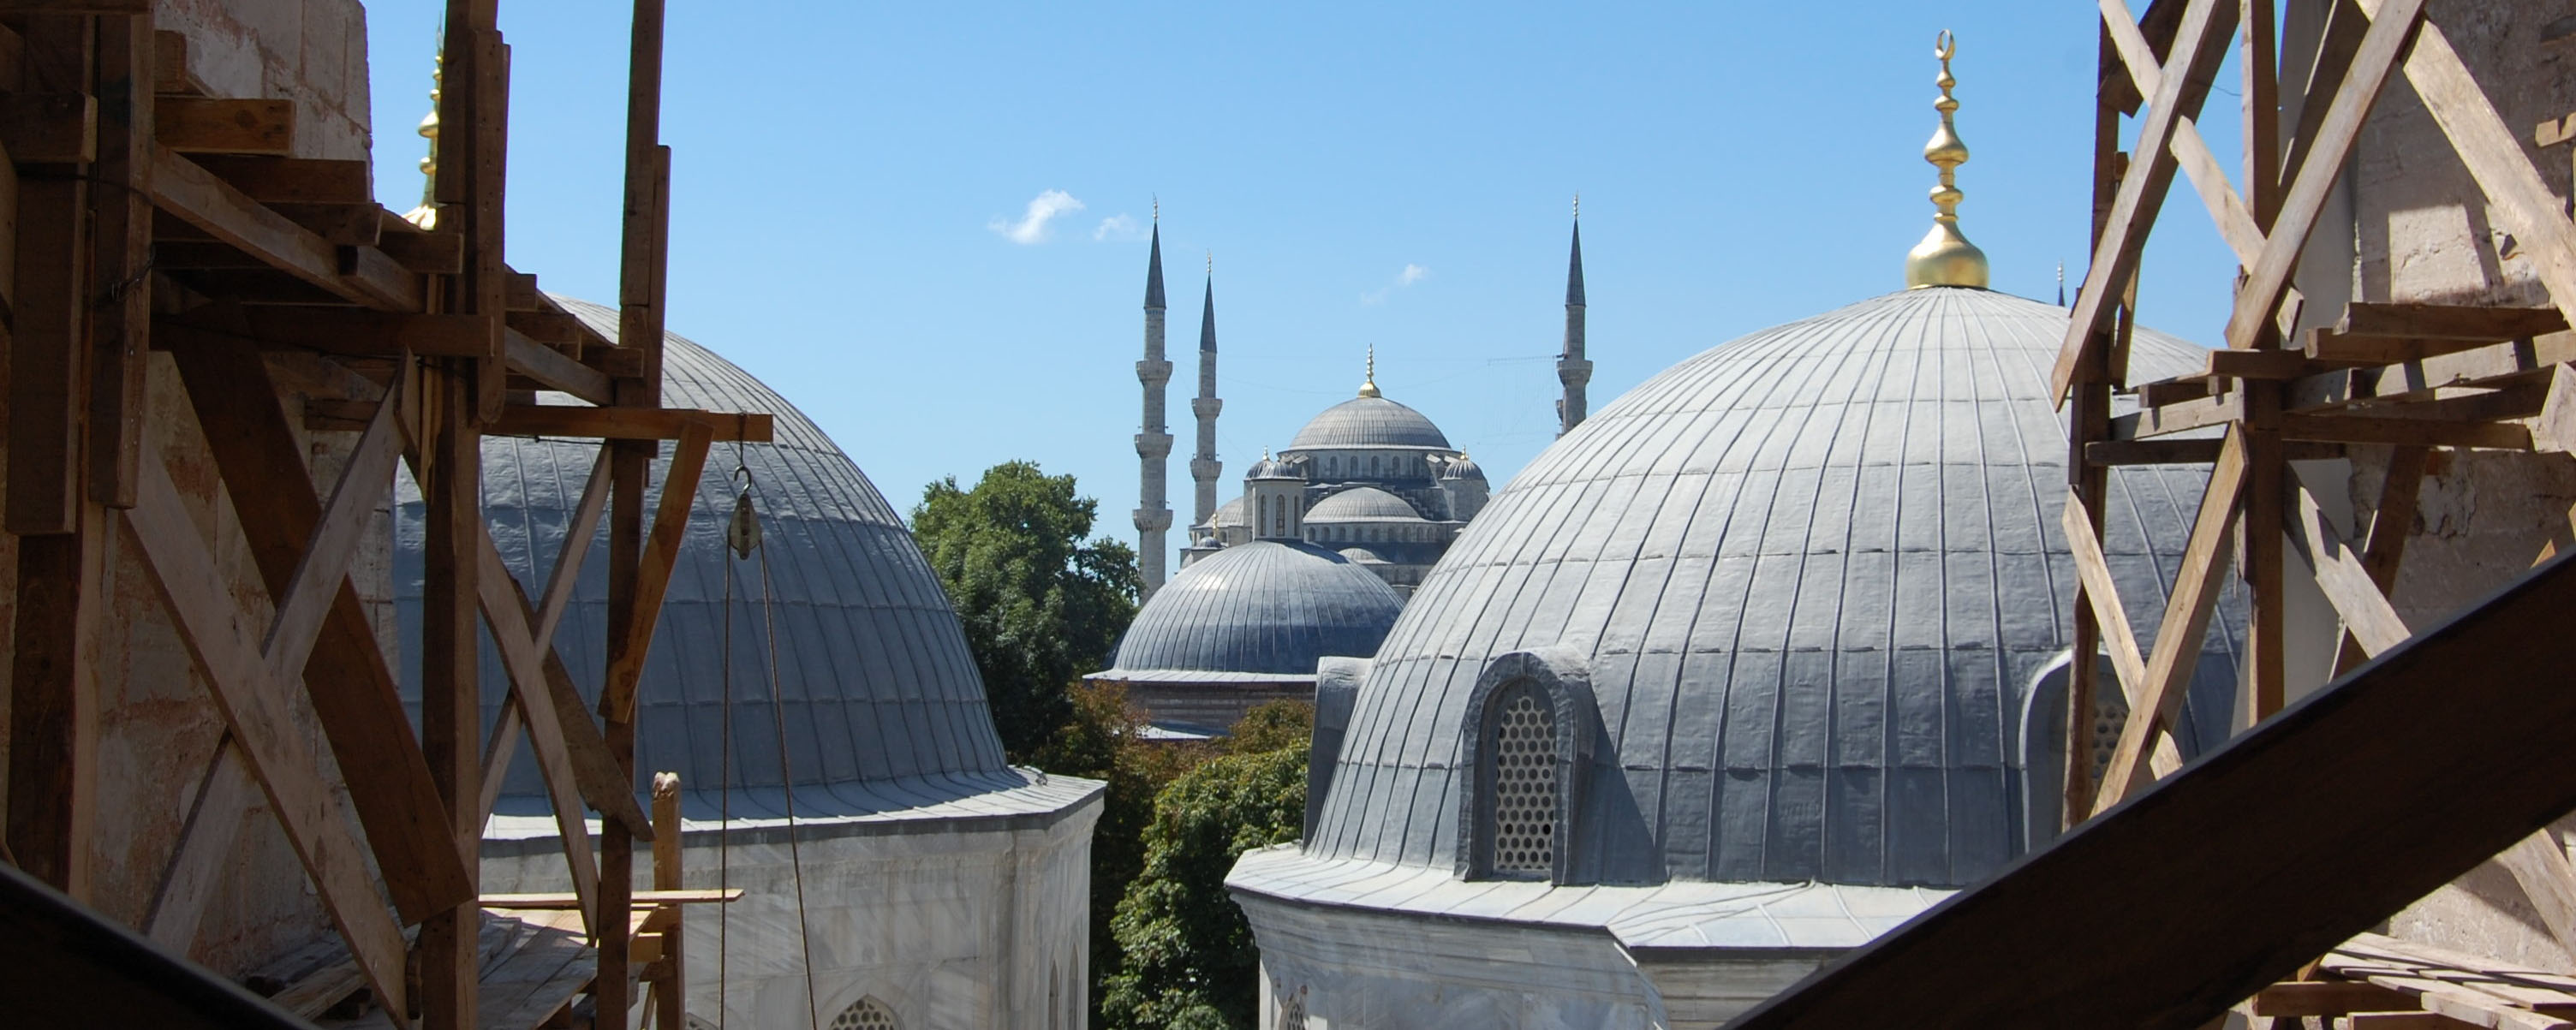 A view of the Hagia Sophia Mosque from the Sultan Ahmed Mosque in Istanbul. Turkey